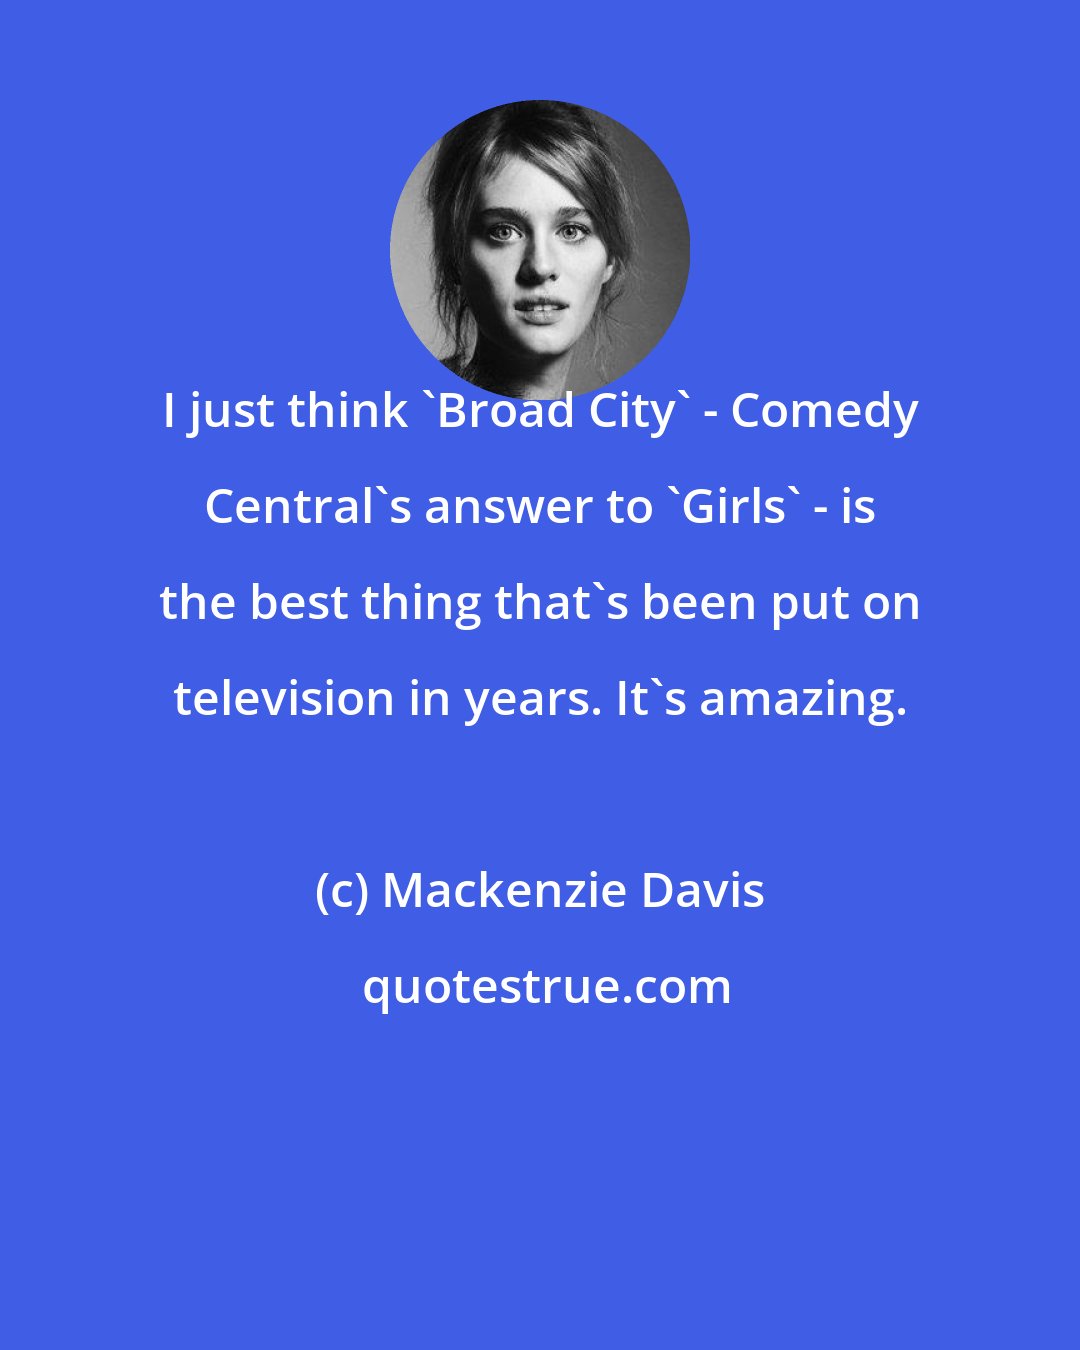 Mackenzie Davis: I just think 'Broad City' - Comedy Central's answer to 'Girls' - is the best thing that's been put on television in years. It's amazing.